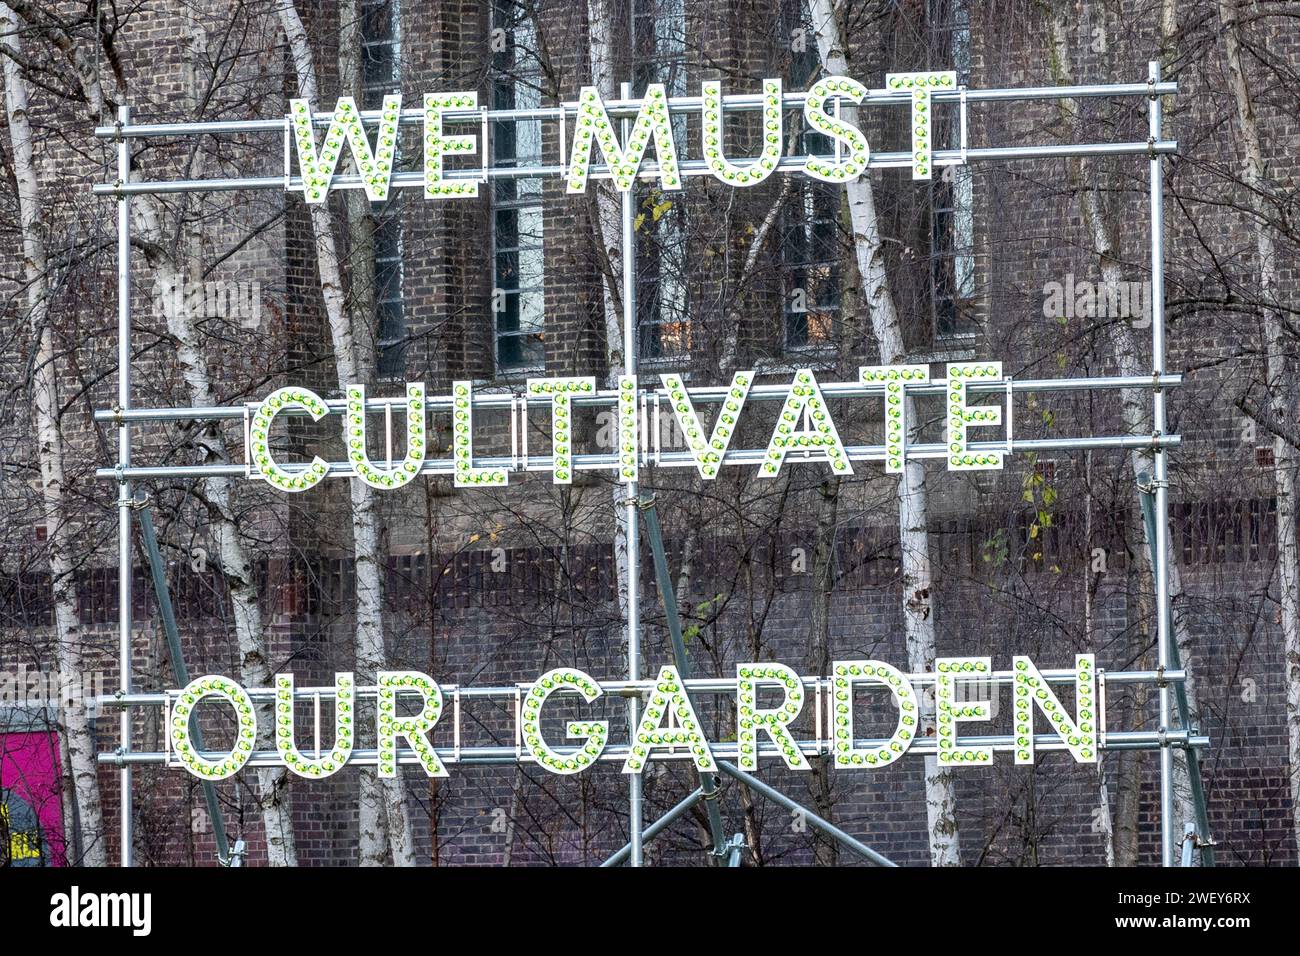 We Must Cultivate Our Garden text-based sculpture by artist Nathan Coley outside the Tate Modern art gallery, London, England, UK Stock Photo